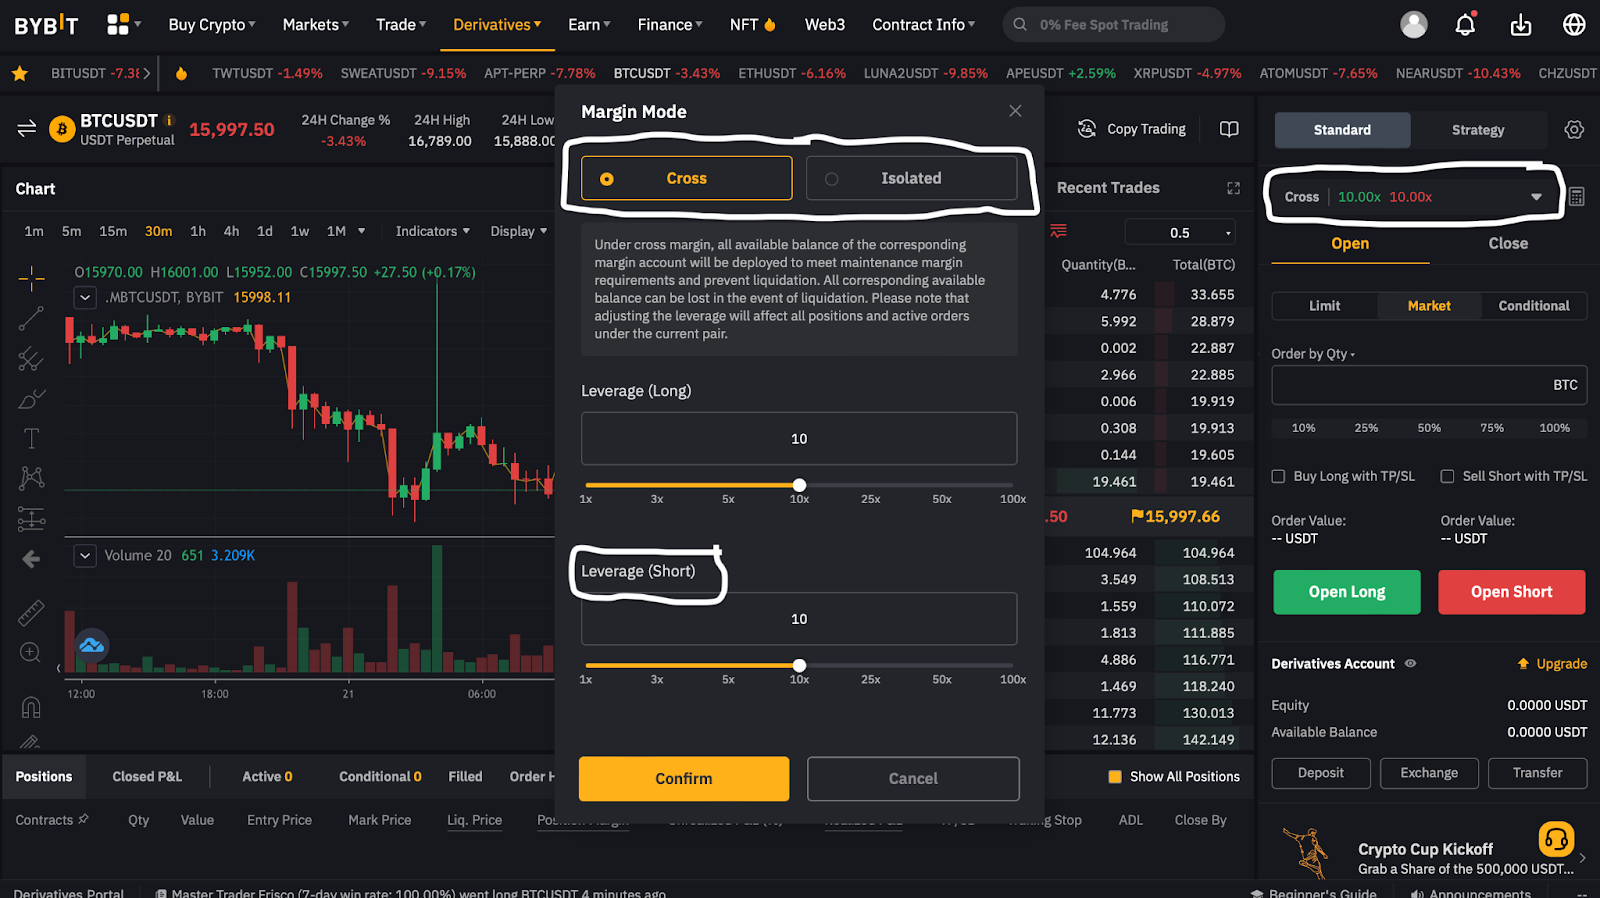 How to Short Sell on Bybit  - - 2023